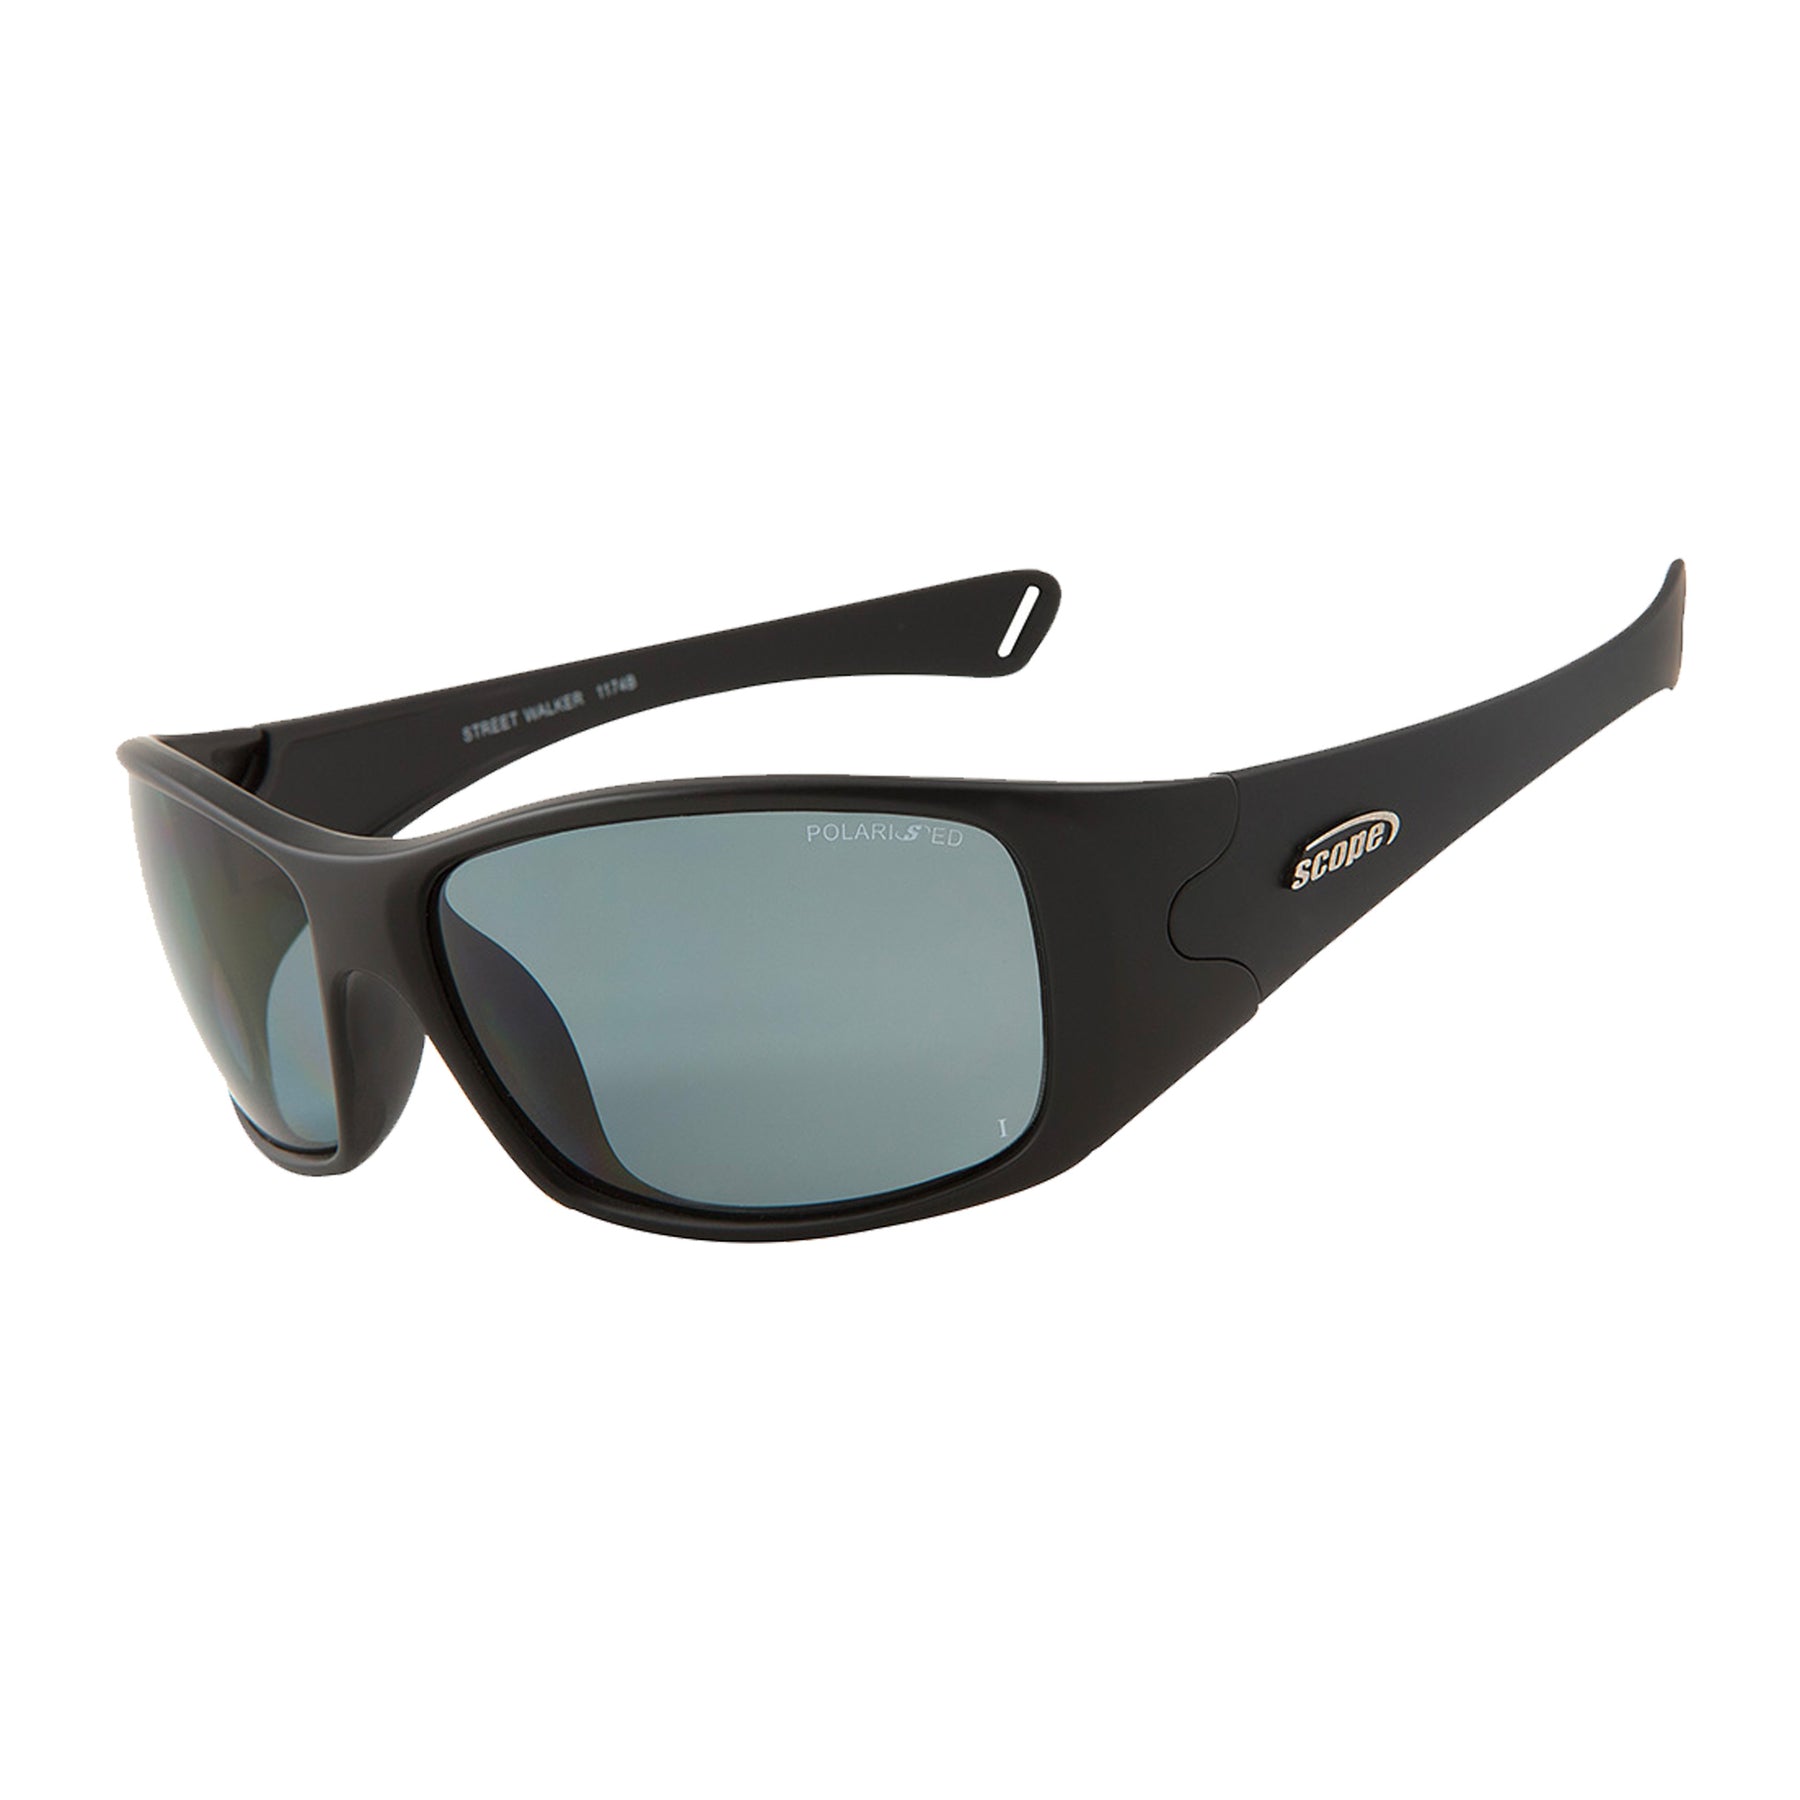 streetwalker safety glasses with polarised lens with soft touch black frame